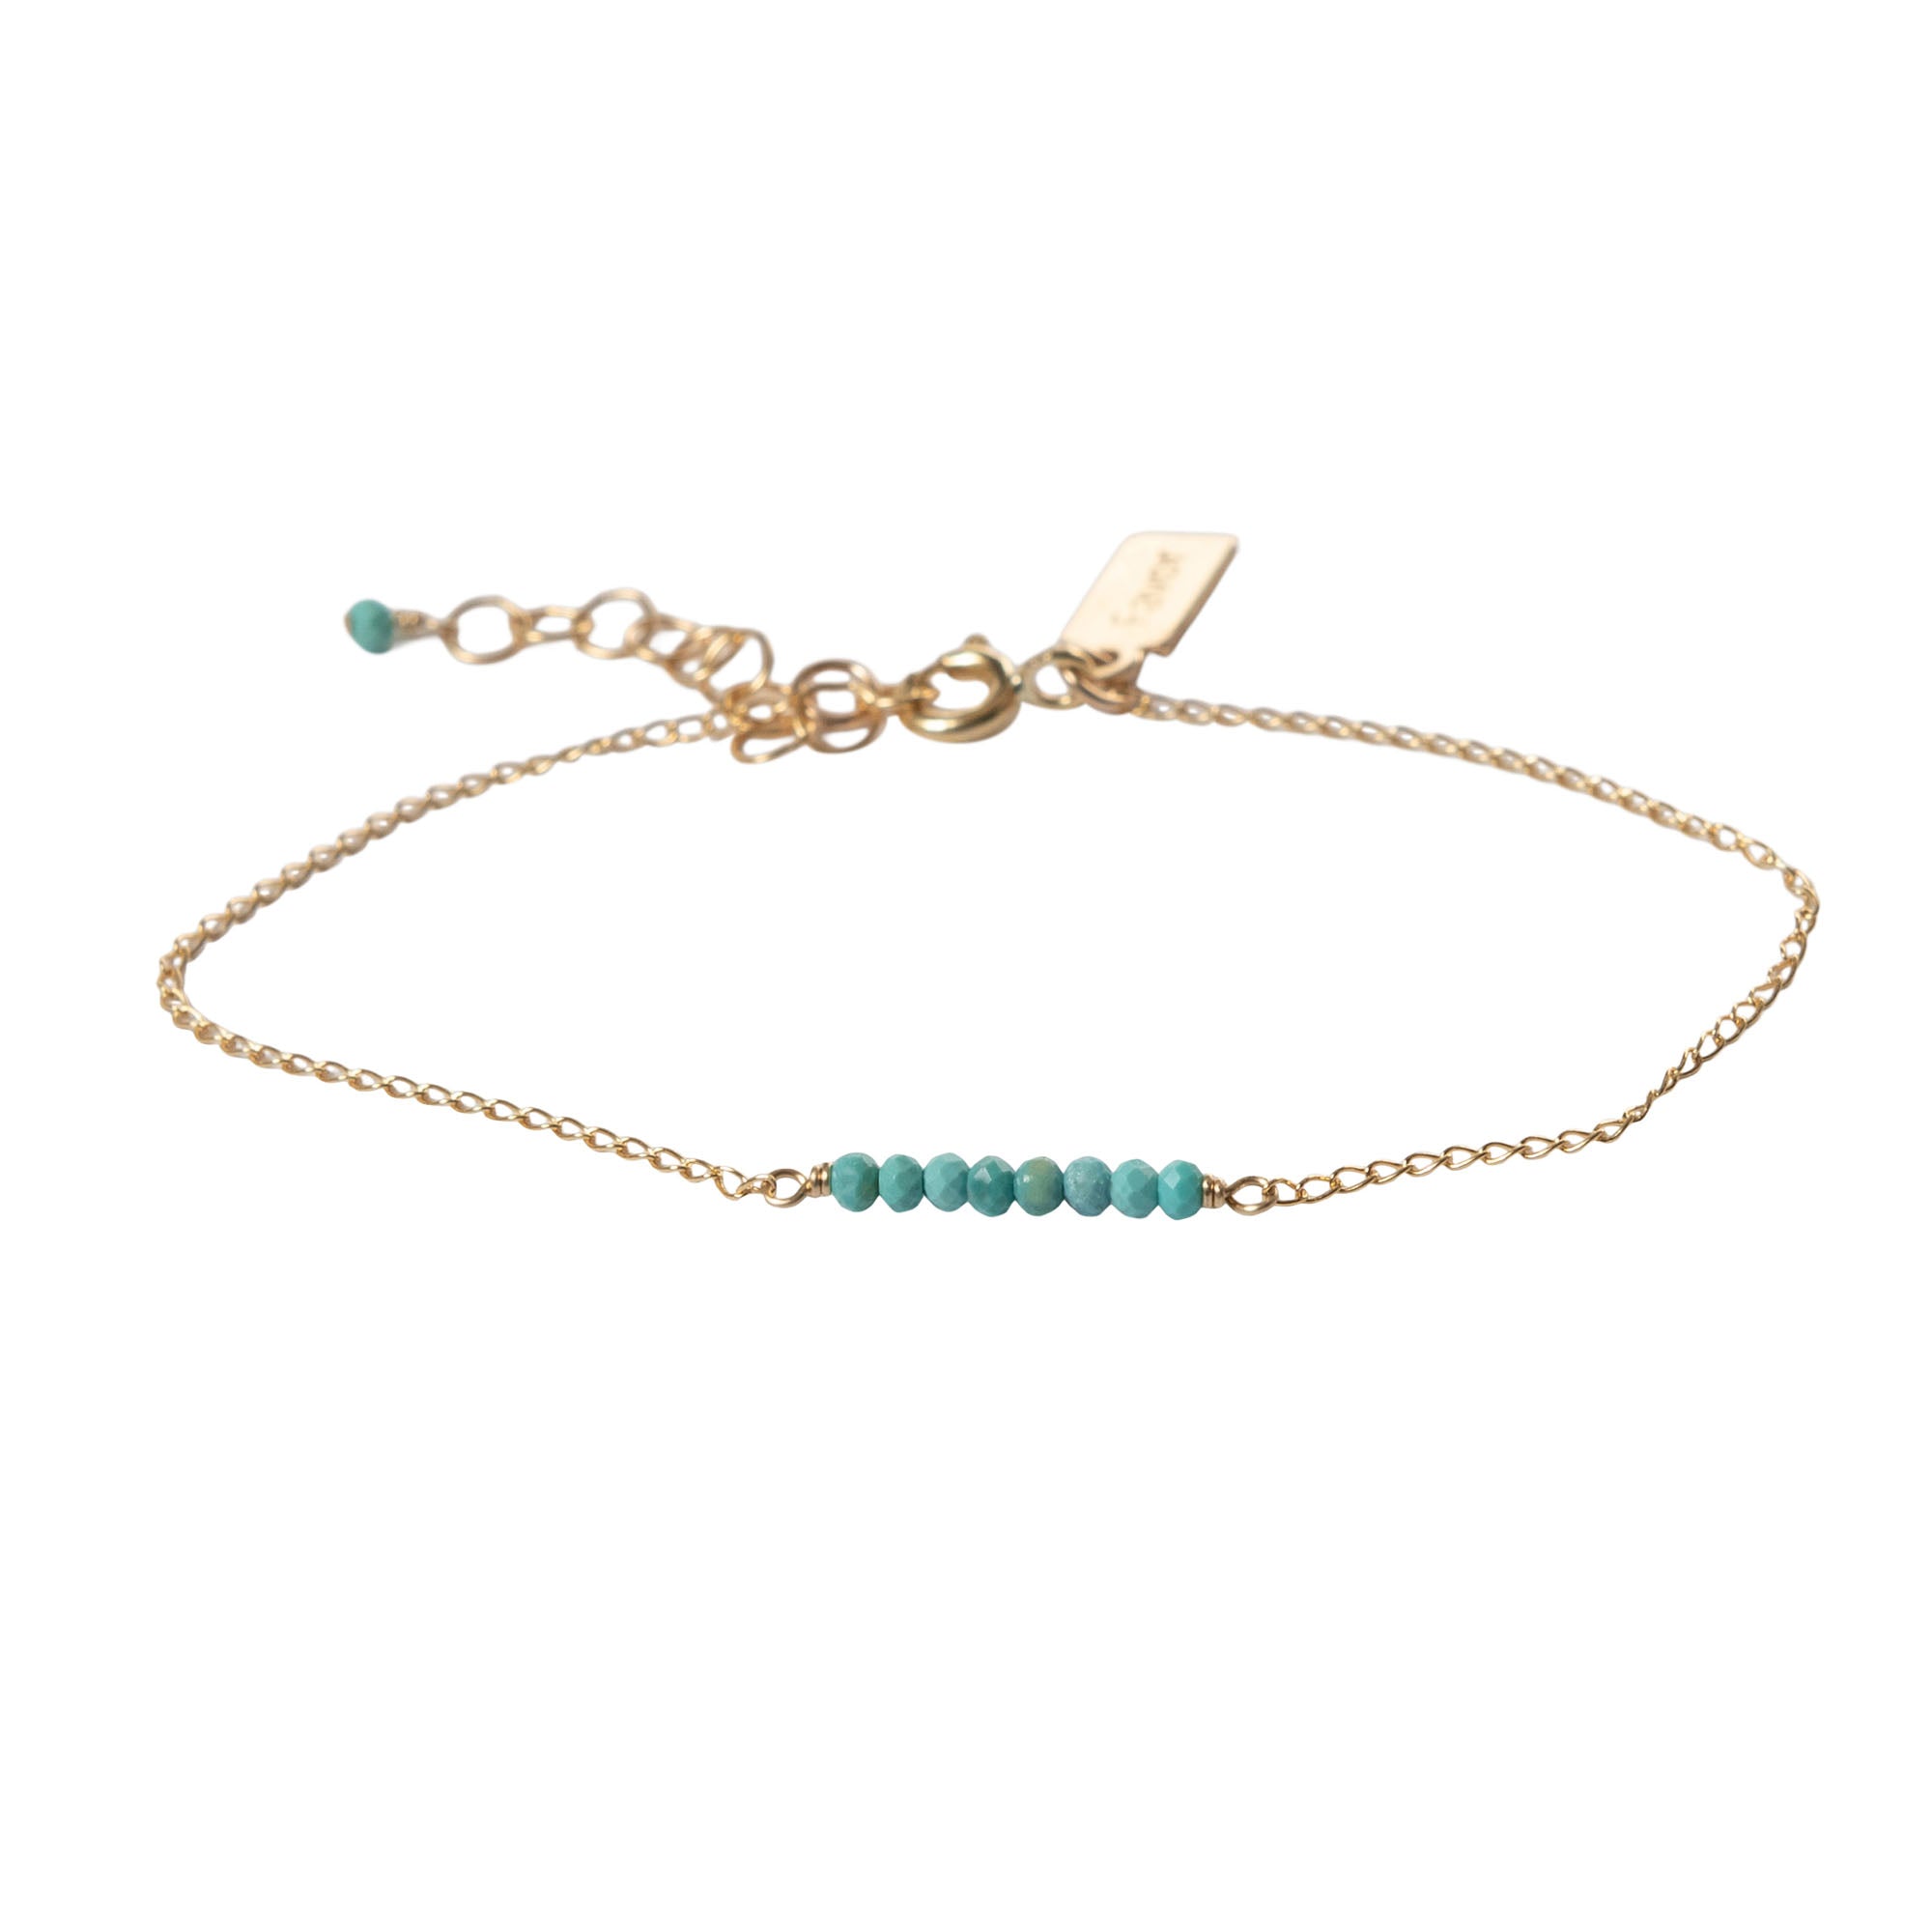 Delicate Turquoise Gemstone Chain Bracelet 14k Gold Fill - Favor Jewelry